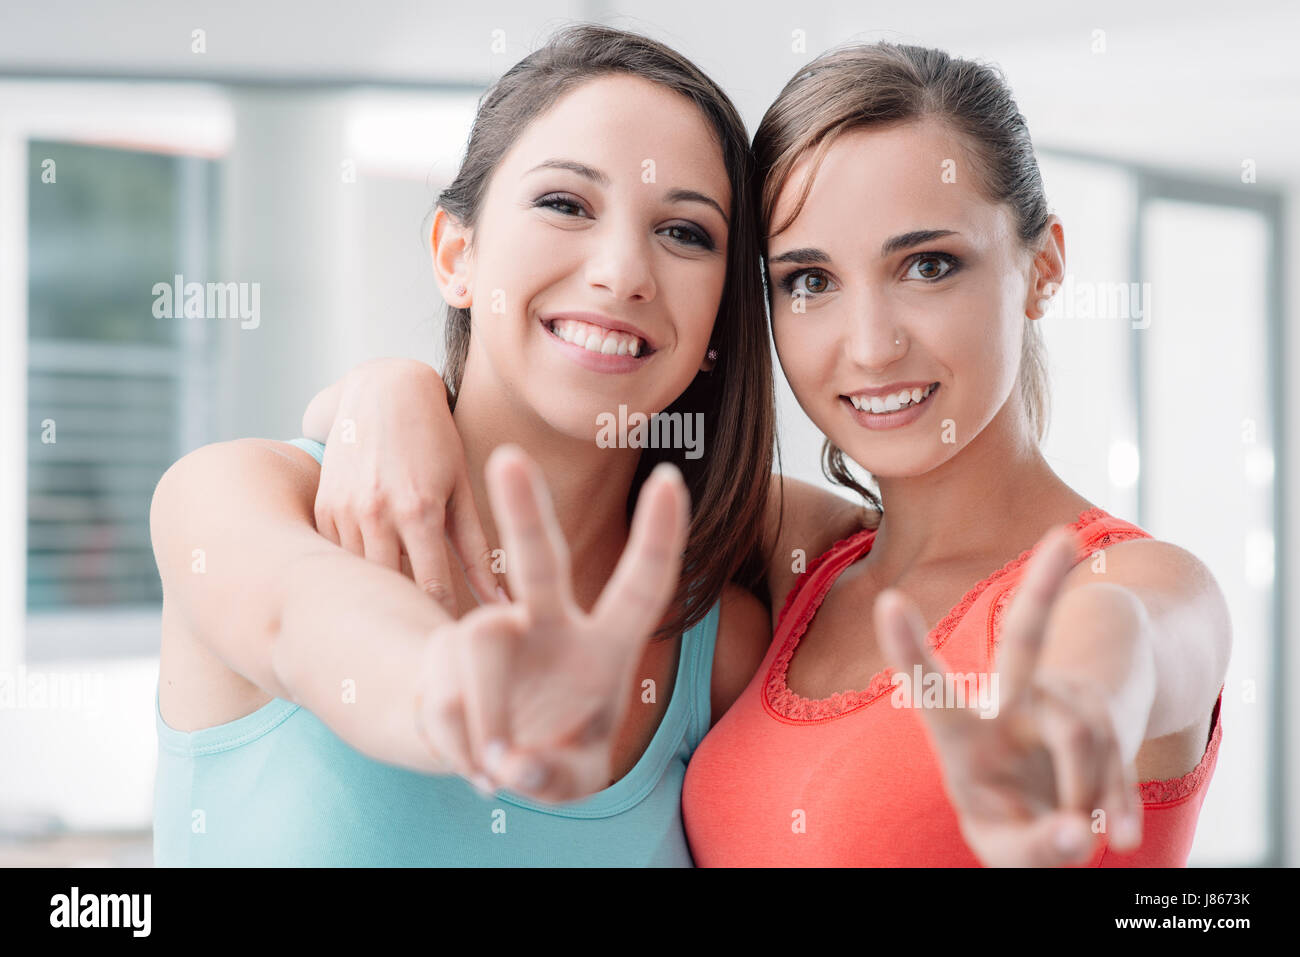 Cheerful teen girls posing, faisant un signe V and smiling at camera, l'un est hugging her friend Banque D'Images